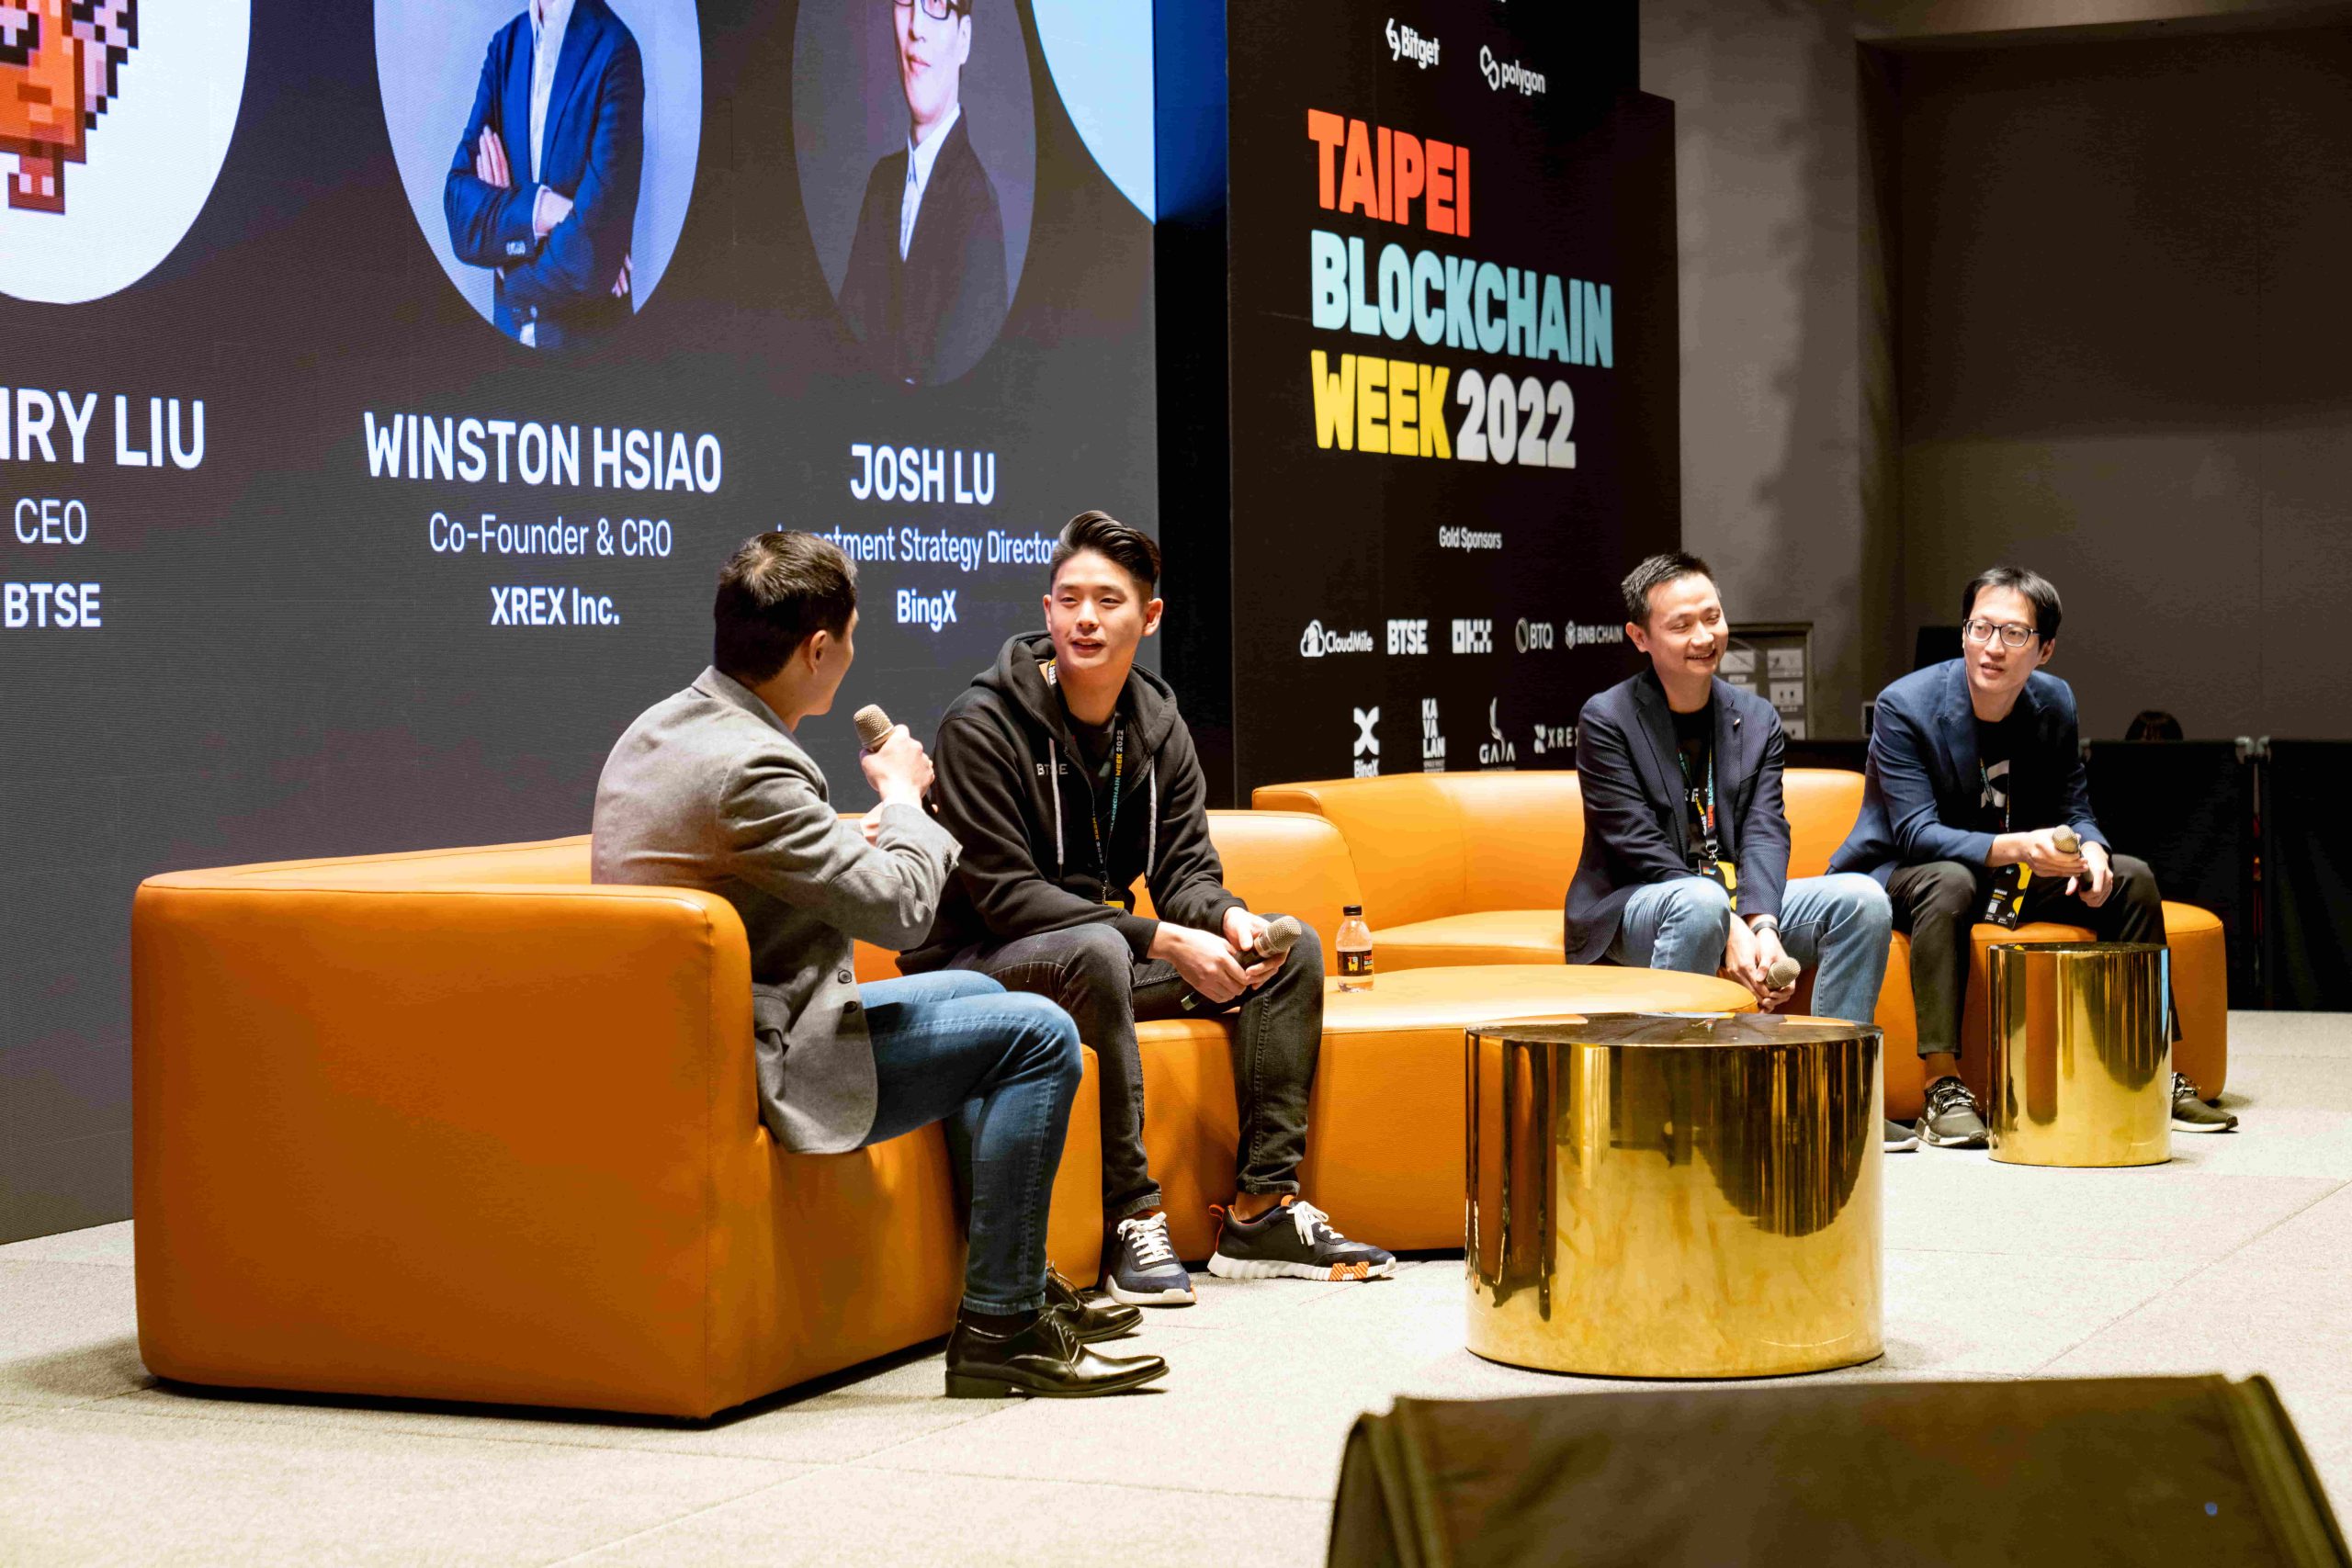 Moderated by Richard Chen, Founder of Iterative Ventures, this panel discussion included Henry Liu – CEO of BTSE, Winston Hsiao – Co-founder and CRO of XREX, and Josh Lu – Investment Strategy Director at BingX. 